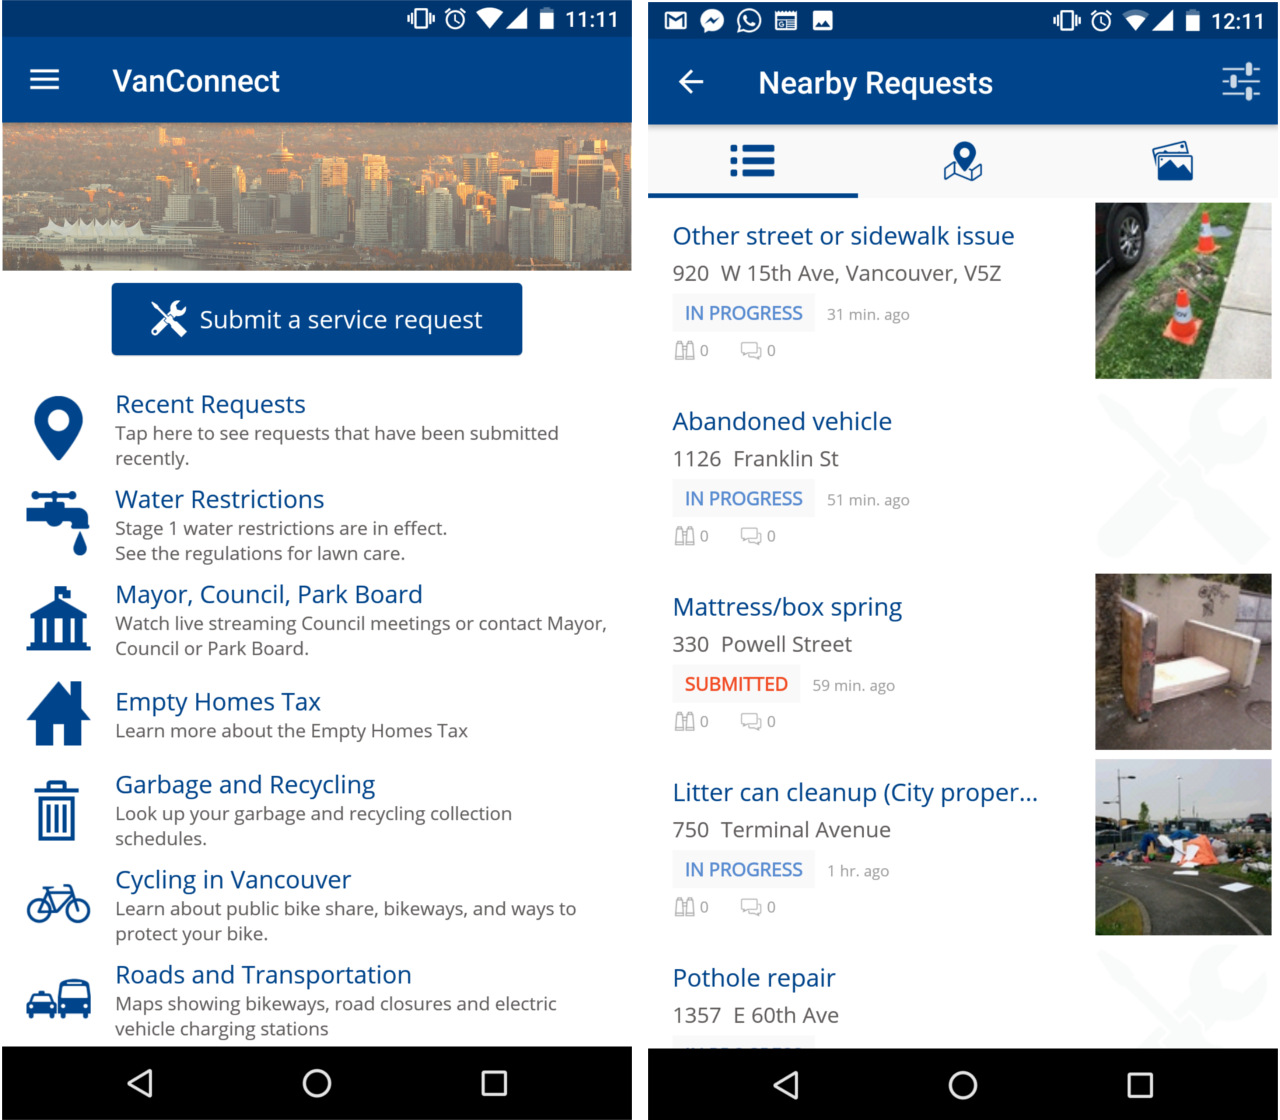 An image showcasing the VanConnect homescreen on Android